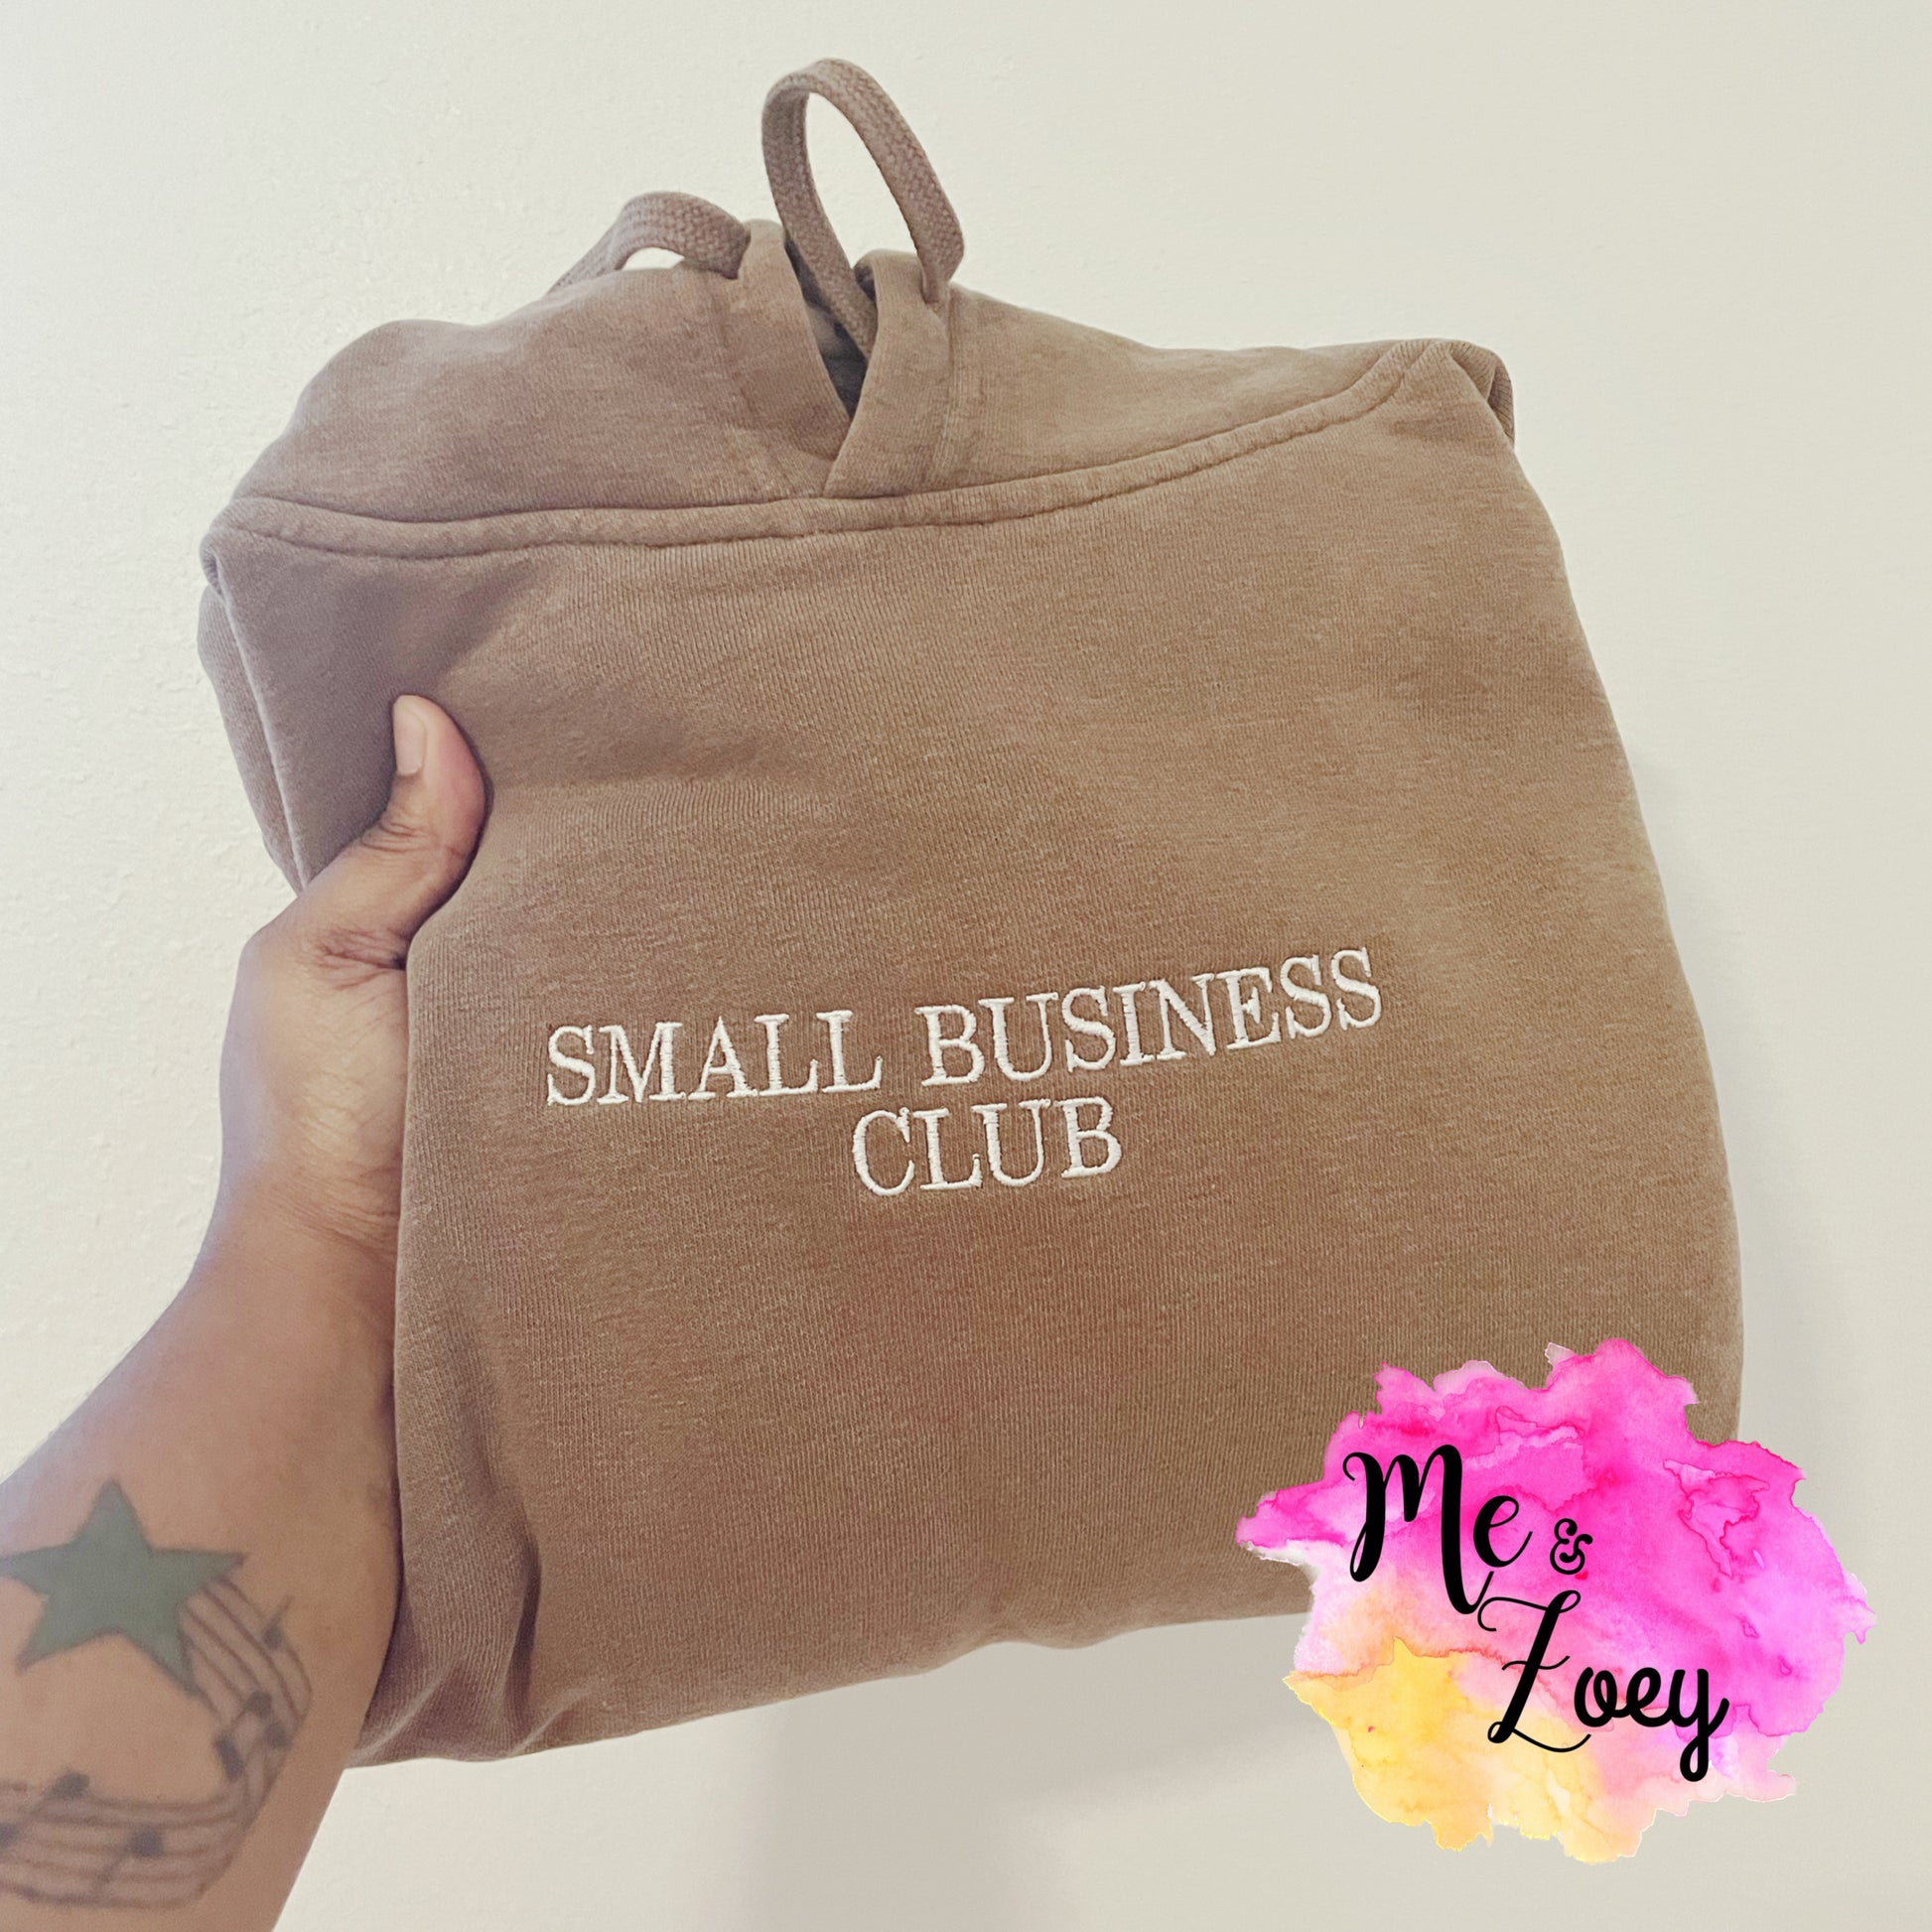 Small Business Club Embroidery - MeAndZoey